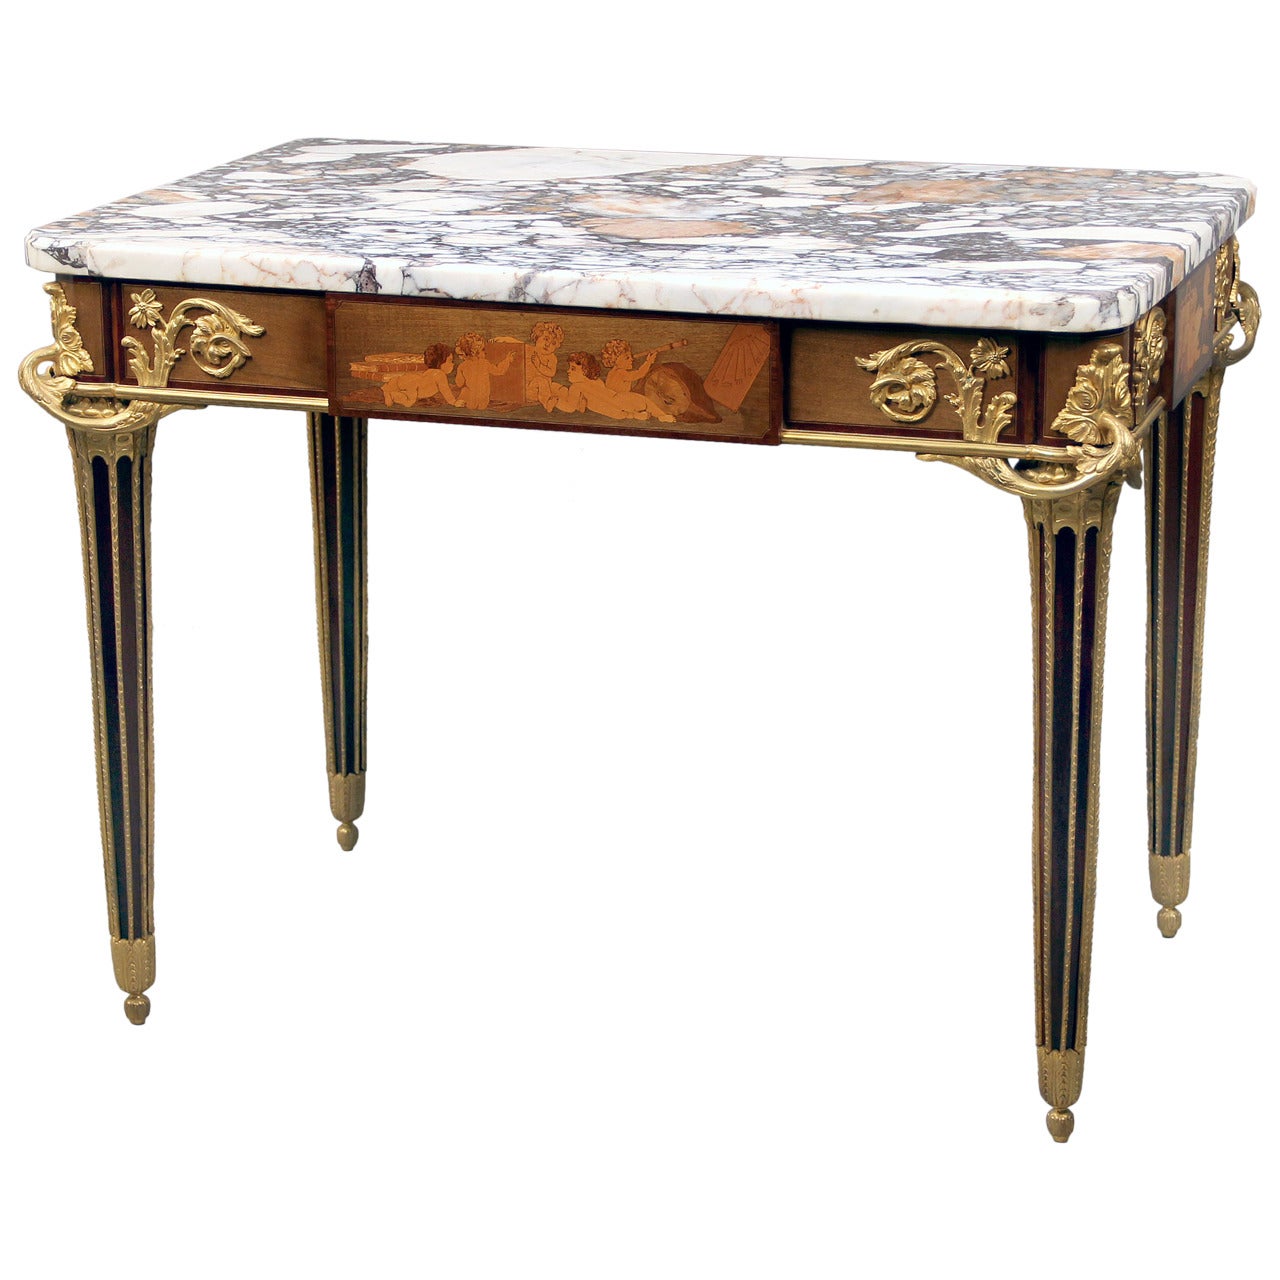 Exceptional Late 19th Century Gilt Bronze-Mounted Marquetry Center Table